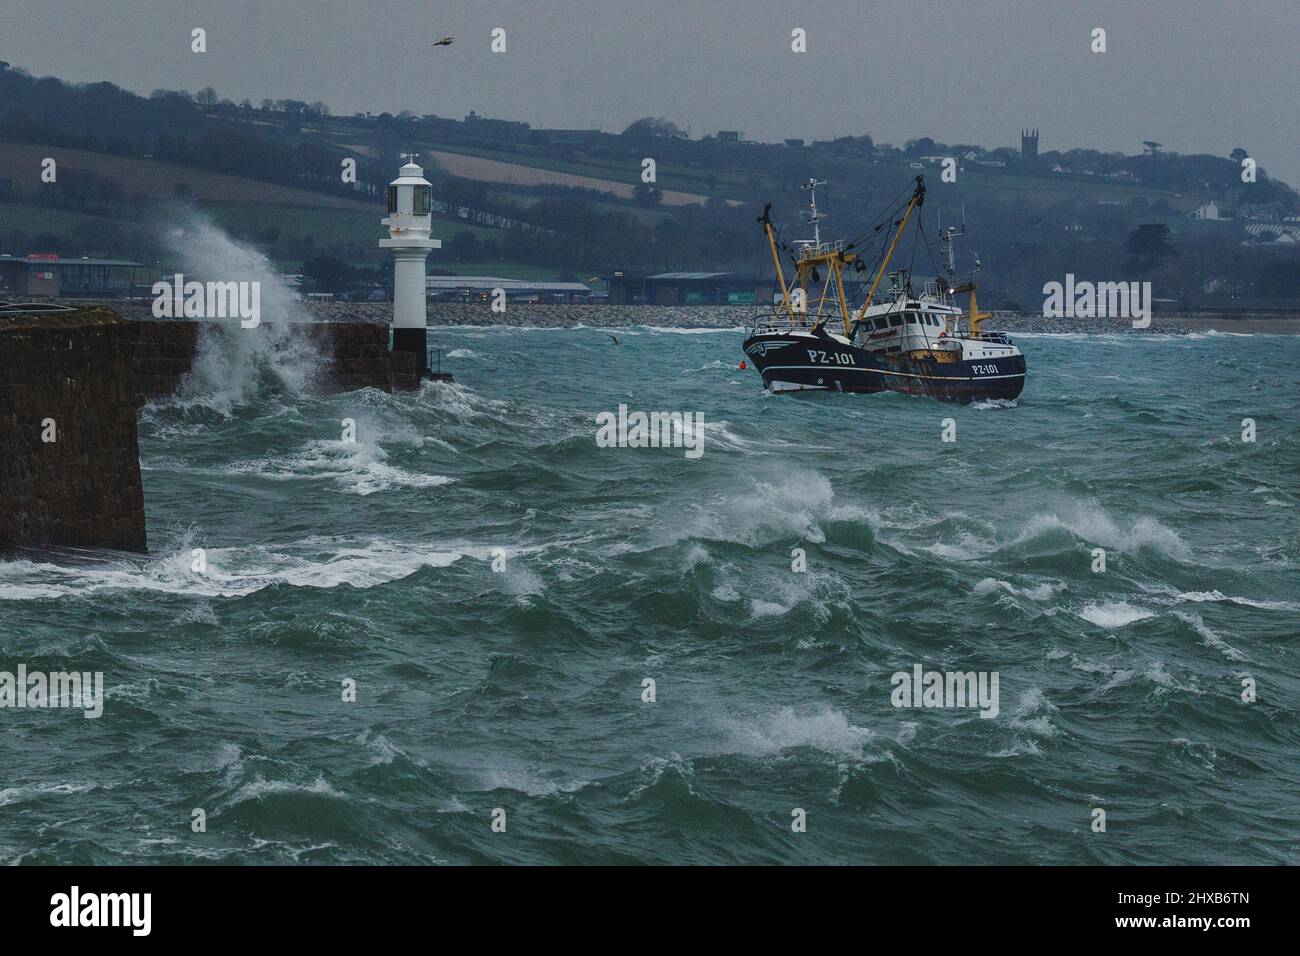 A beam trawler from the Newlyn fishing fleet rocks wildly in the rough seas as she puts into Penzance harbour for repairs. Stock Photo